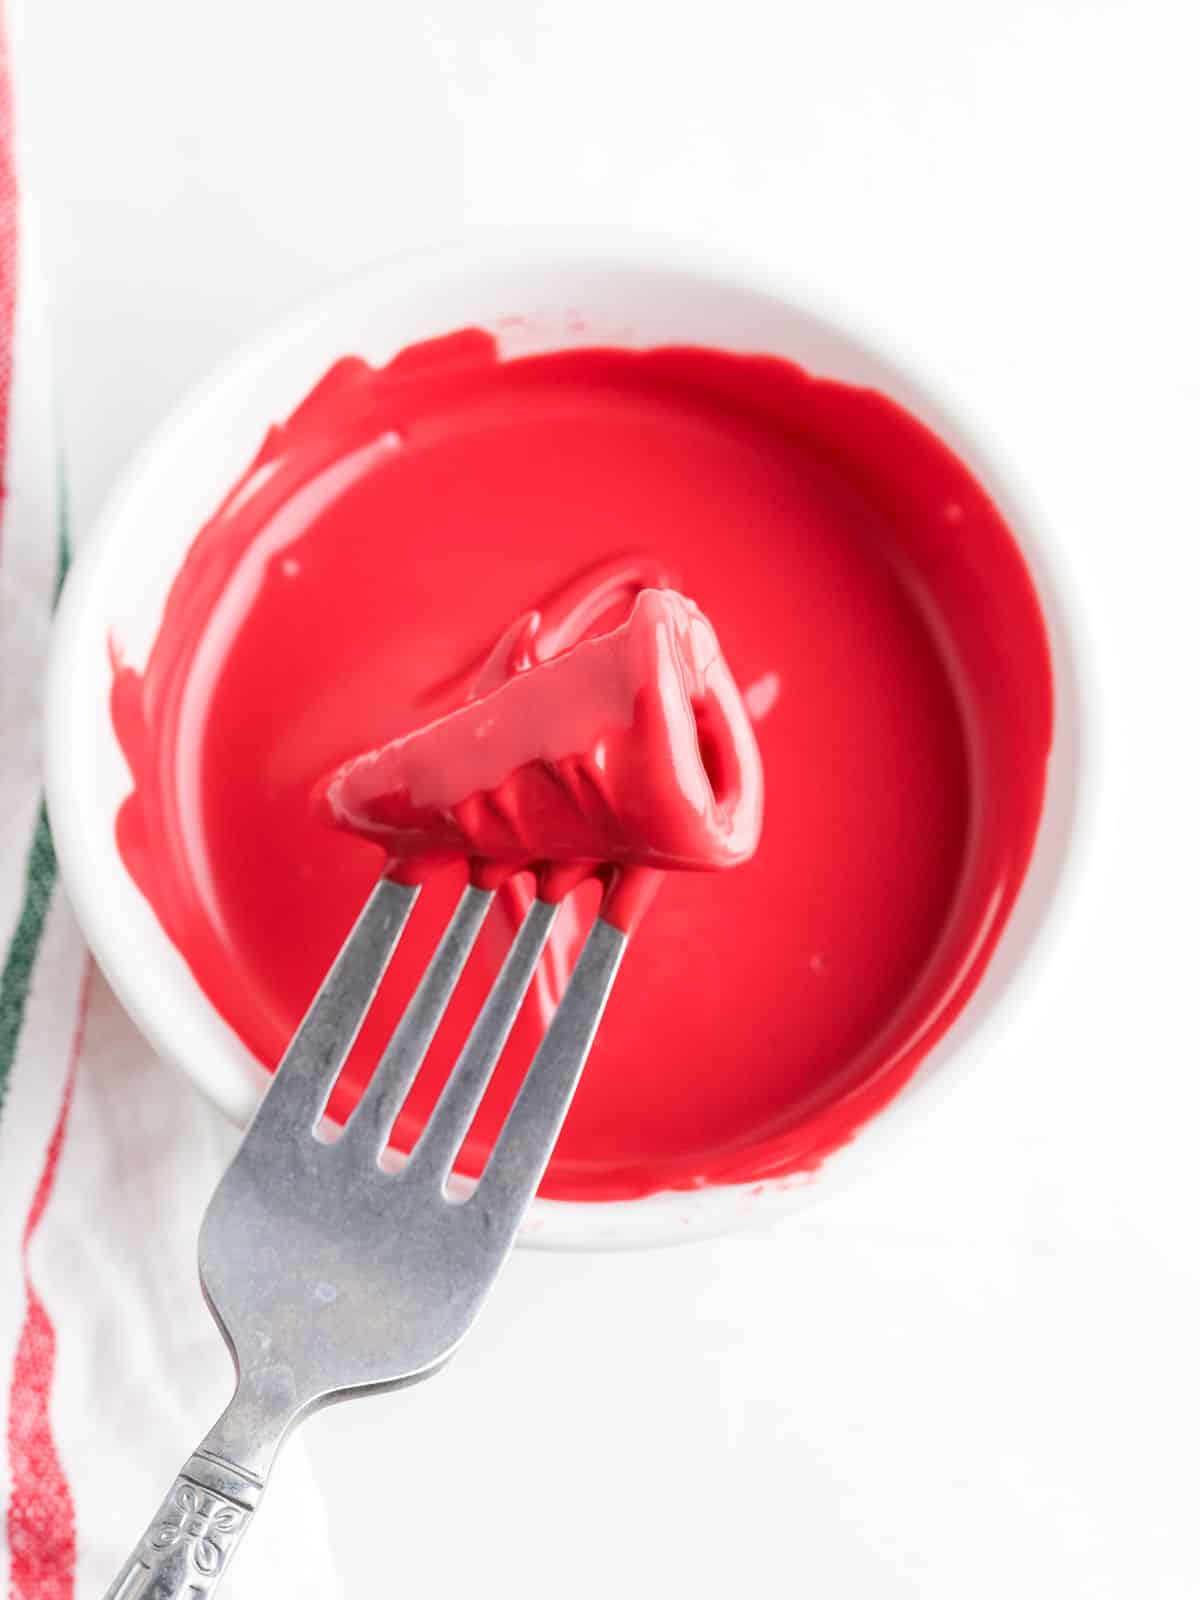 A fork with a Bugle dipped in red melted chocolate over a white bowl.